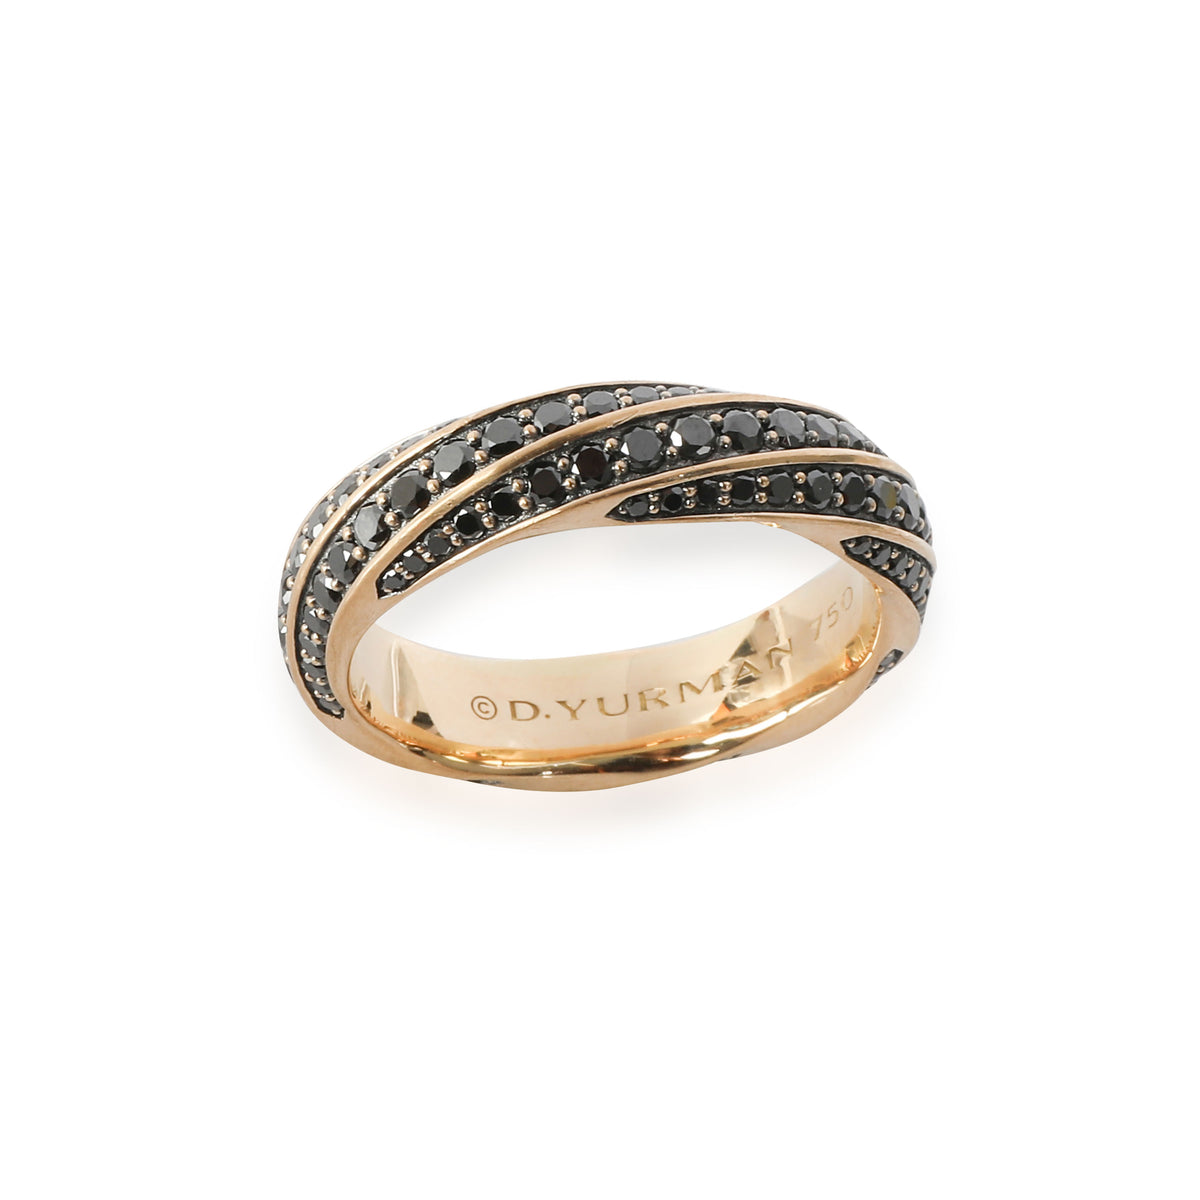 Cable Edge Band Ring with Black Diamonds, 1.62 ctw